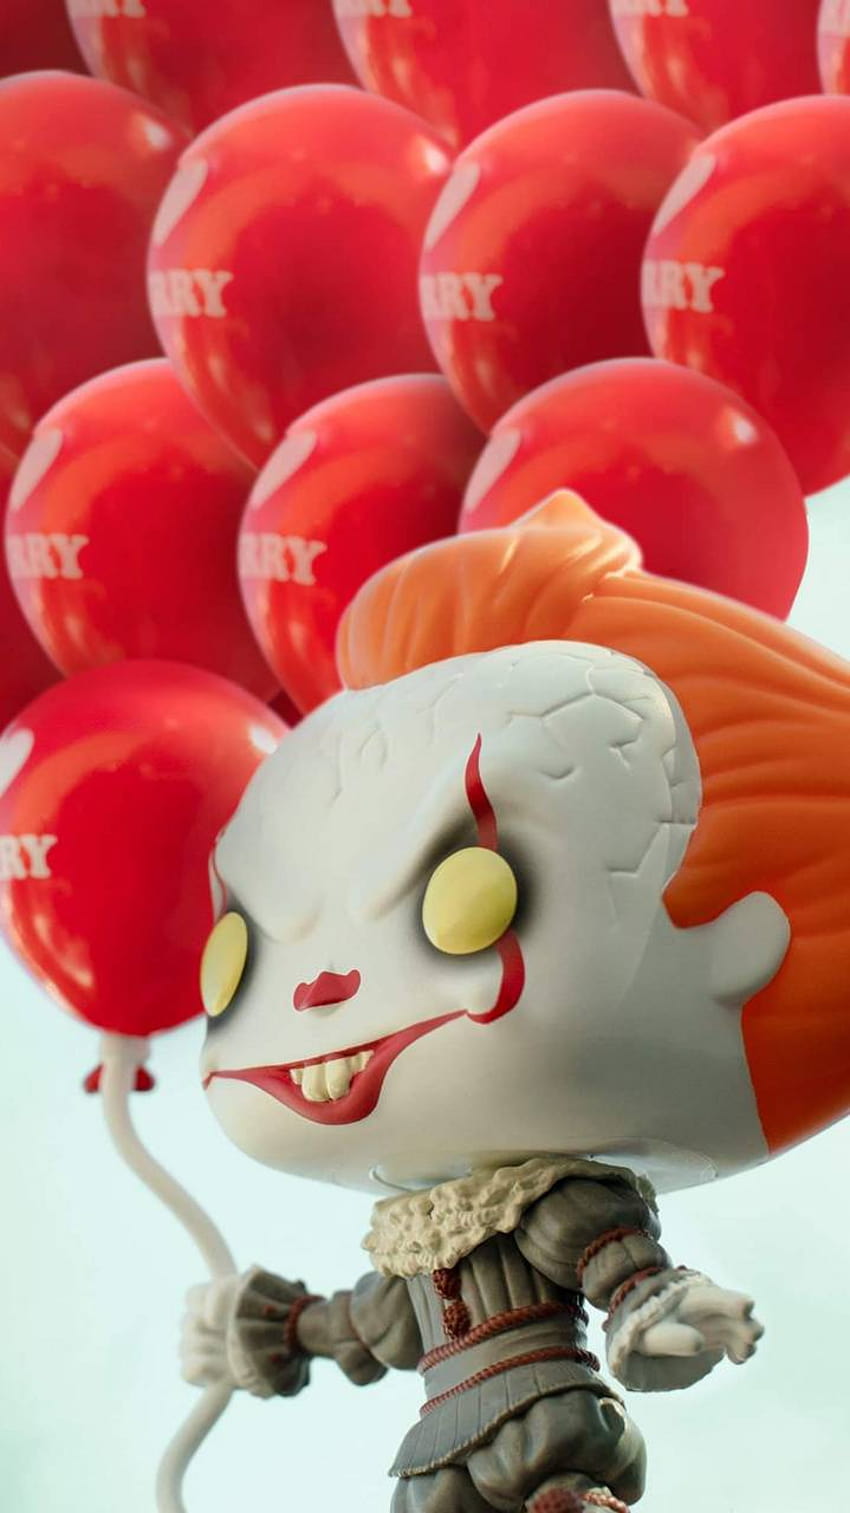 Pennywise oleh 619alberto, pop funko pennywise wallpaper ponsel HD